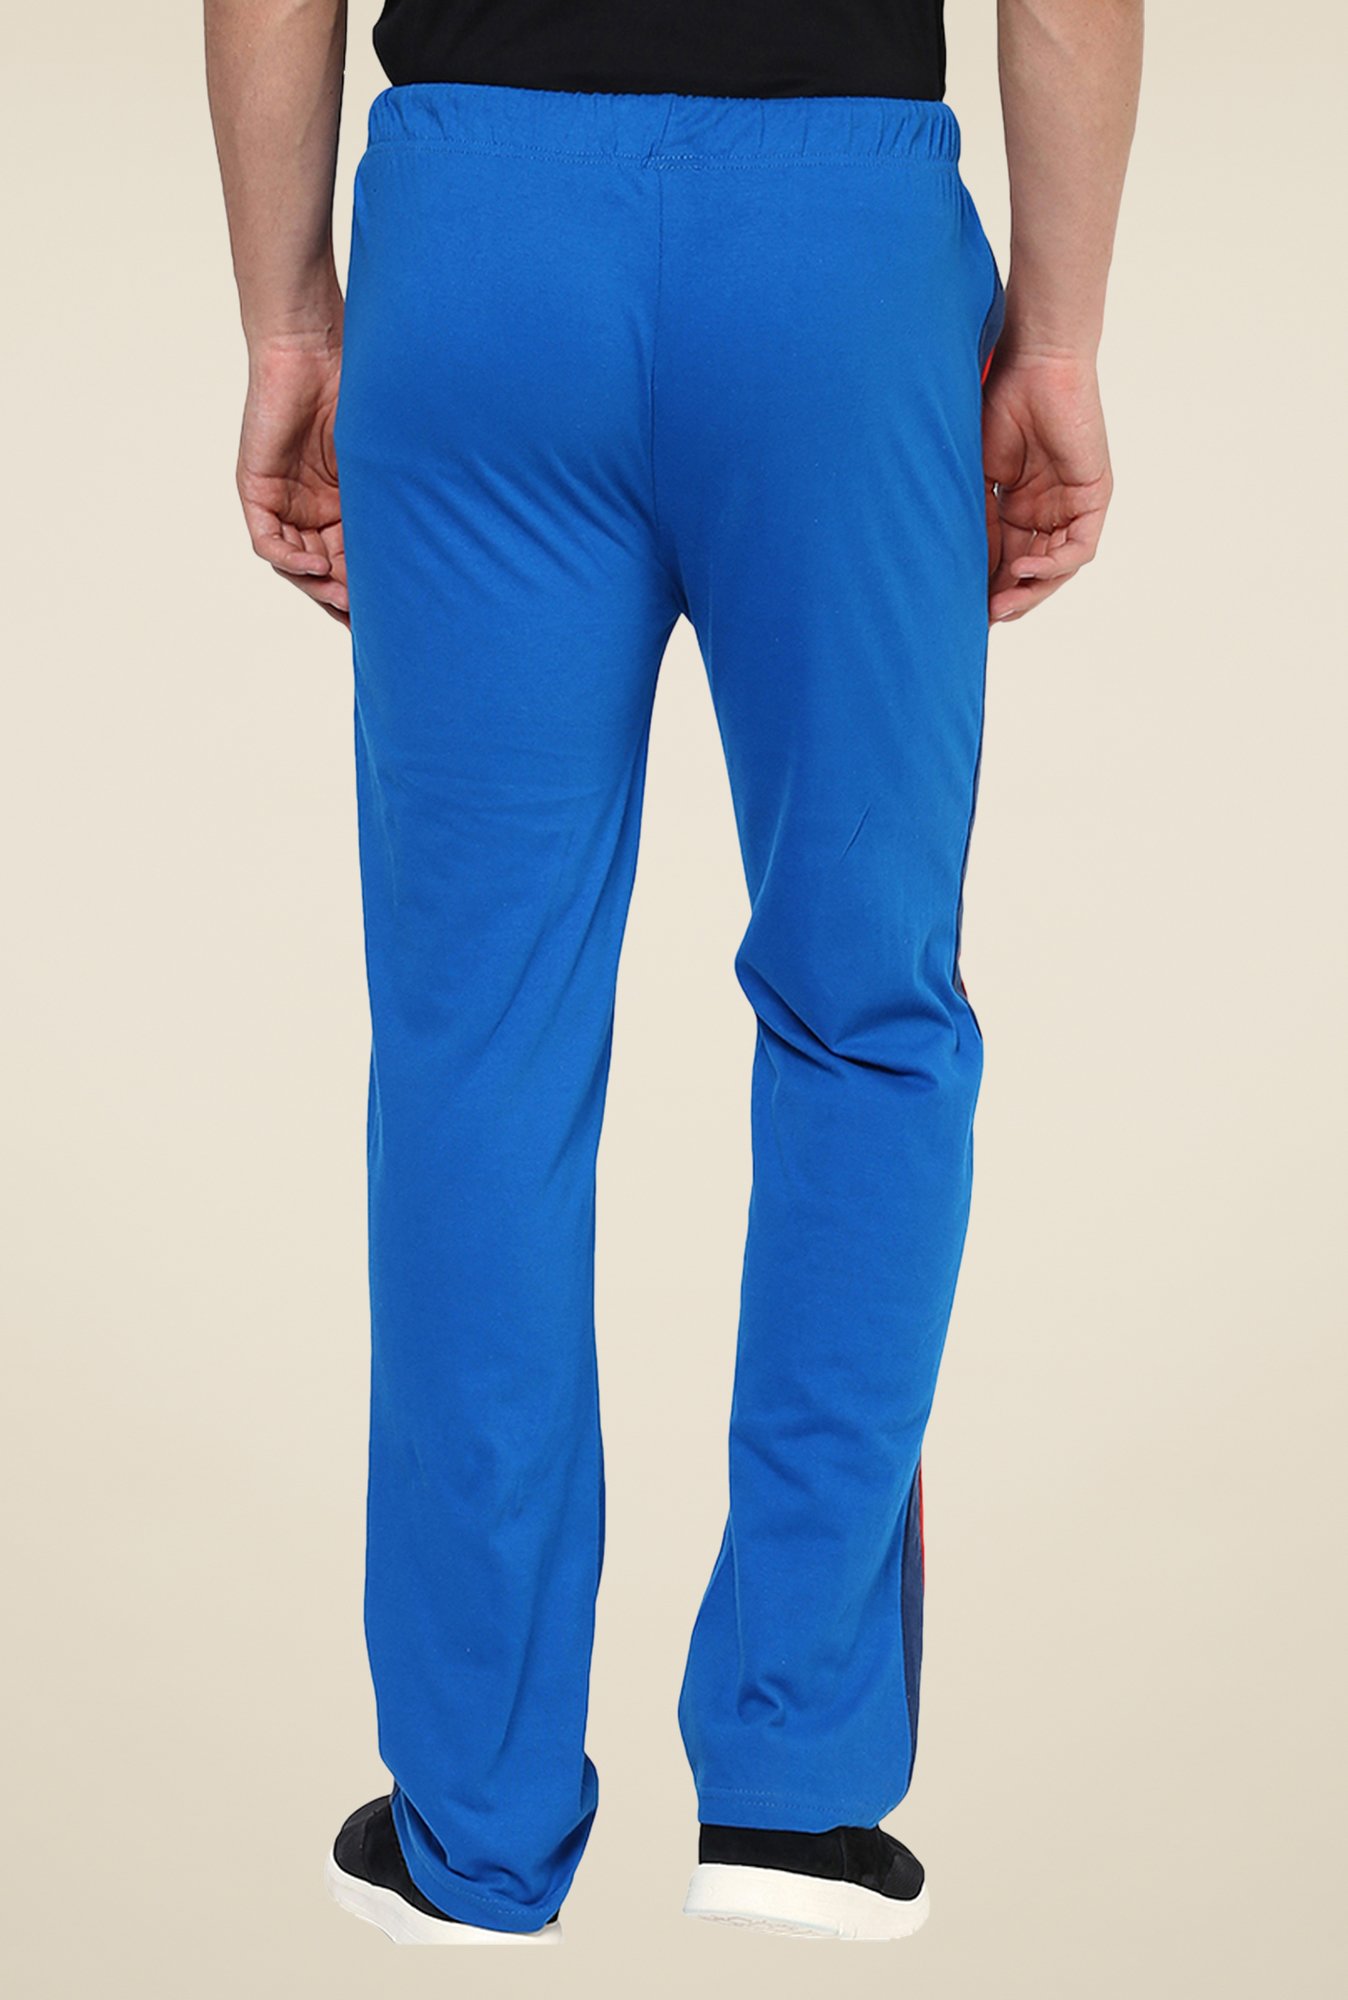 PUMA Bmw M Motorsport Mcs Youth Track Pants 530461_04 in Chennai at best  price by Sports World - Justdial